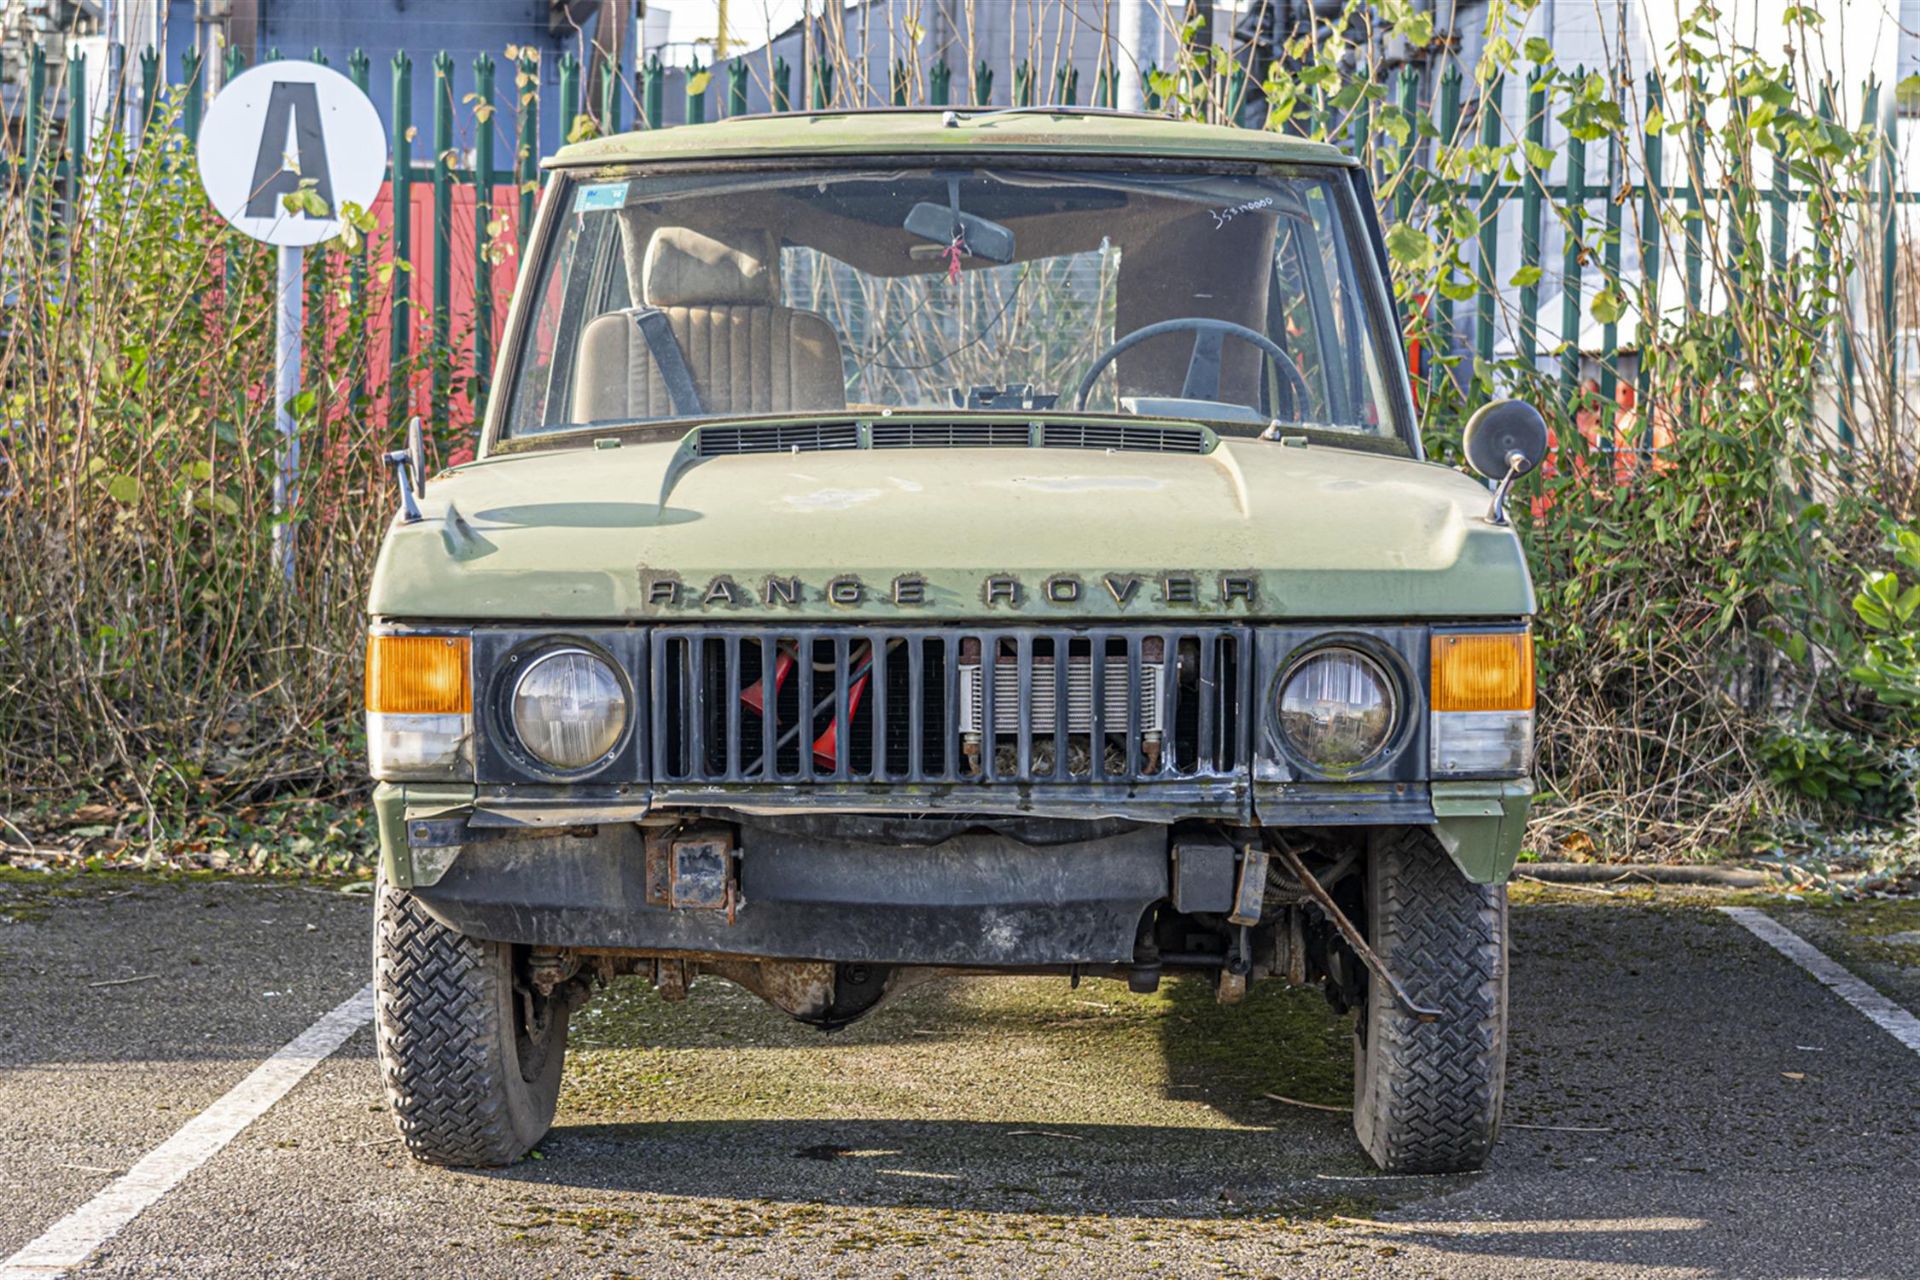 1975 Range Rover 'Suffix D' - Image 2 of 5